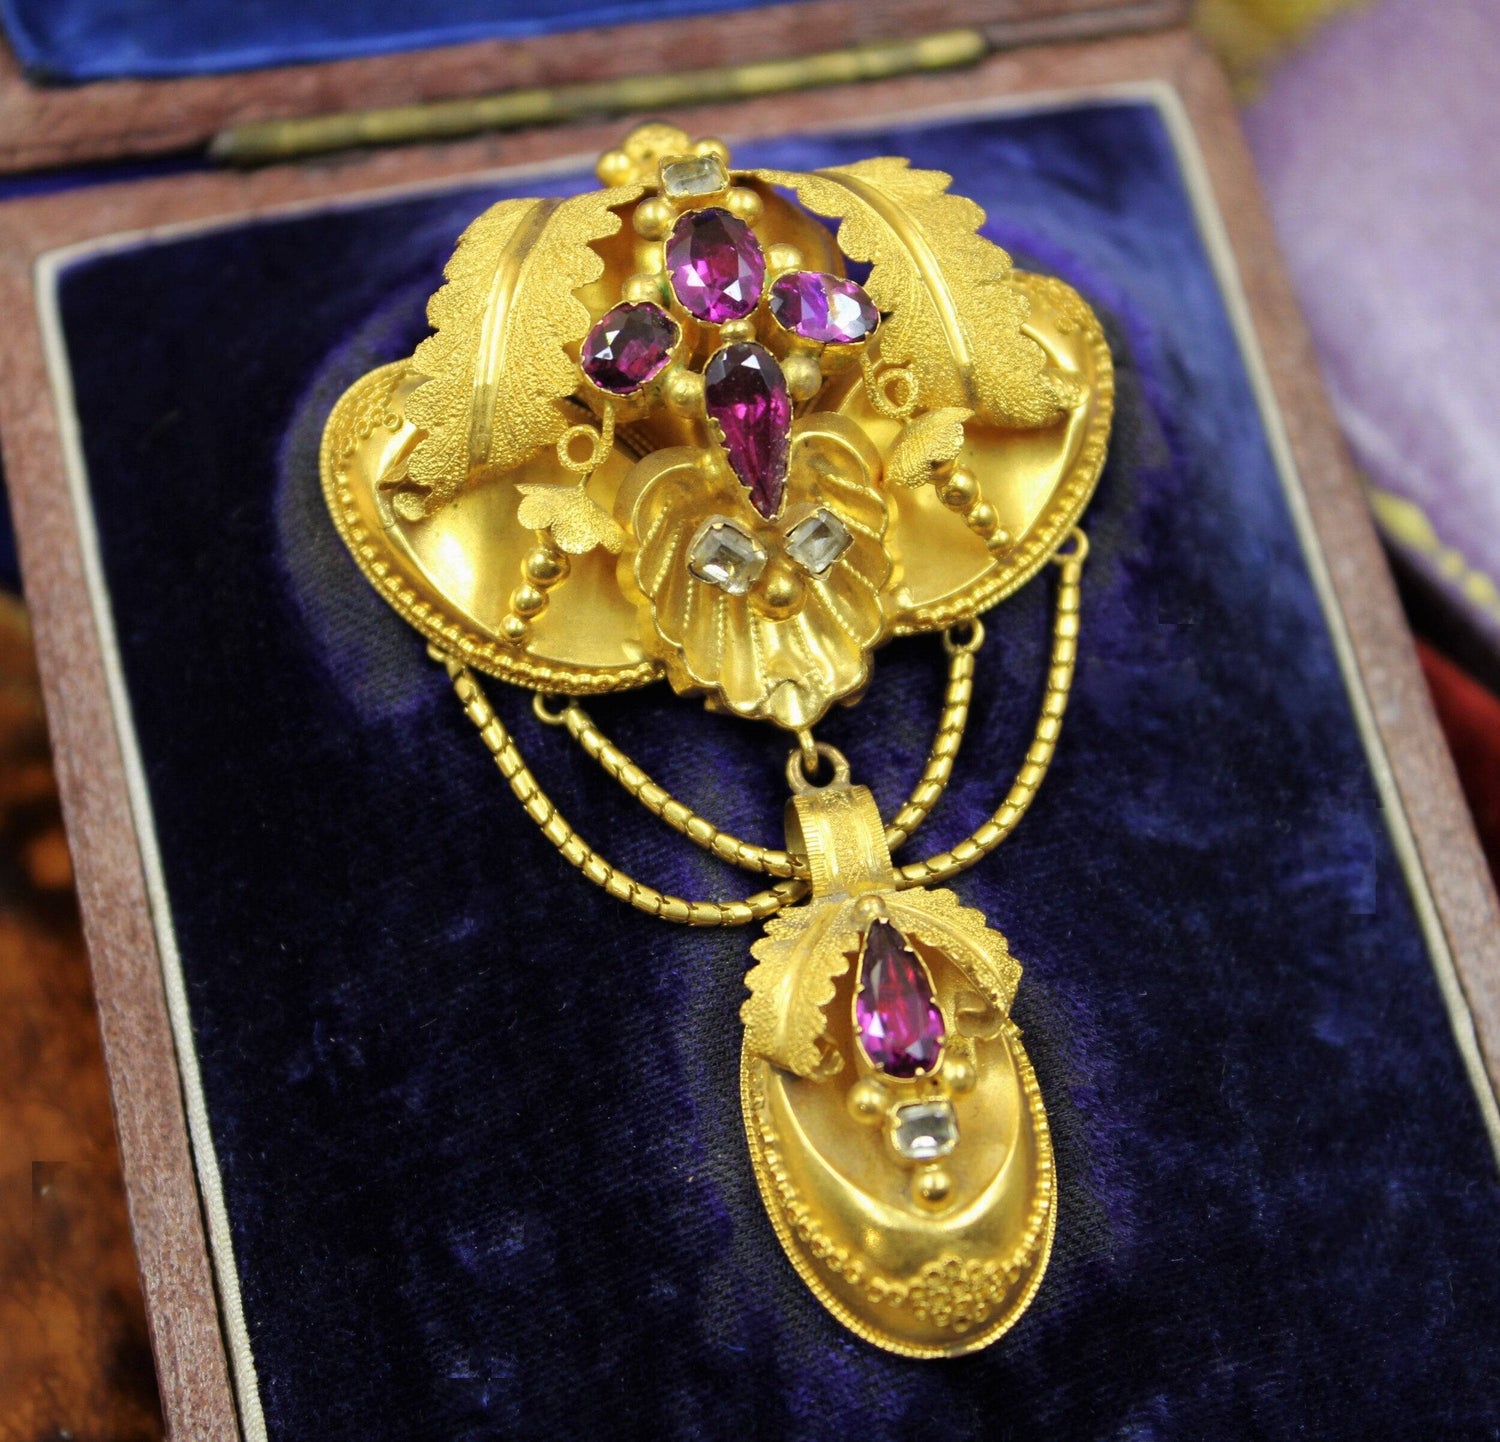 An extremely beautiful Victorian Almandine Garnet Pendant/Brooch mounted in 15ct Yellow Gold, English, Circa 1860 - Robin Haydock Antiques